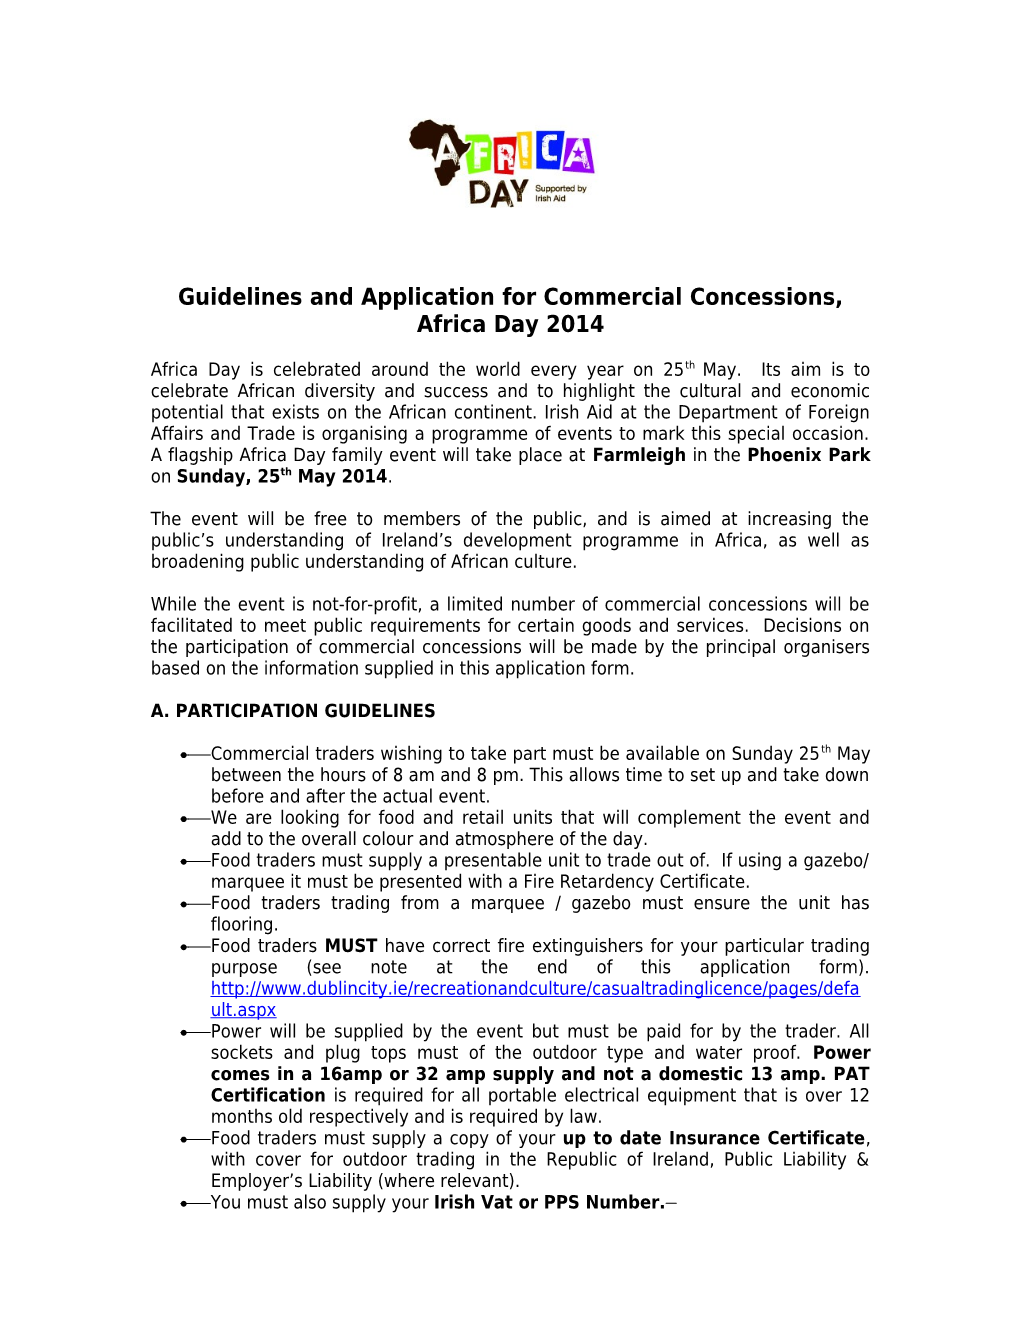 Guidelines and Application for Commercial Concessions, Africa Day 2014